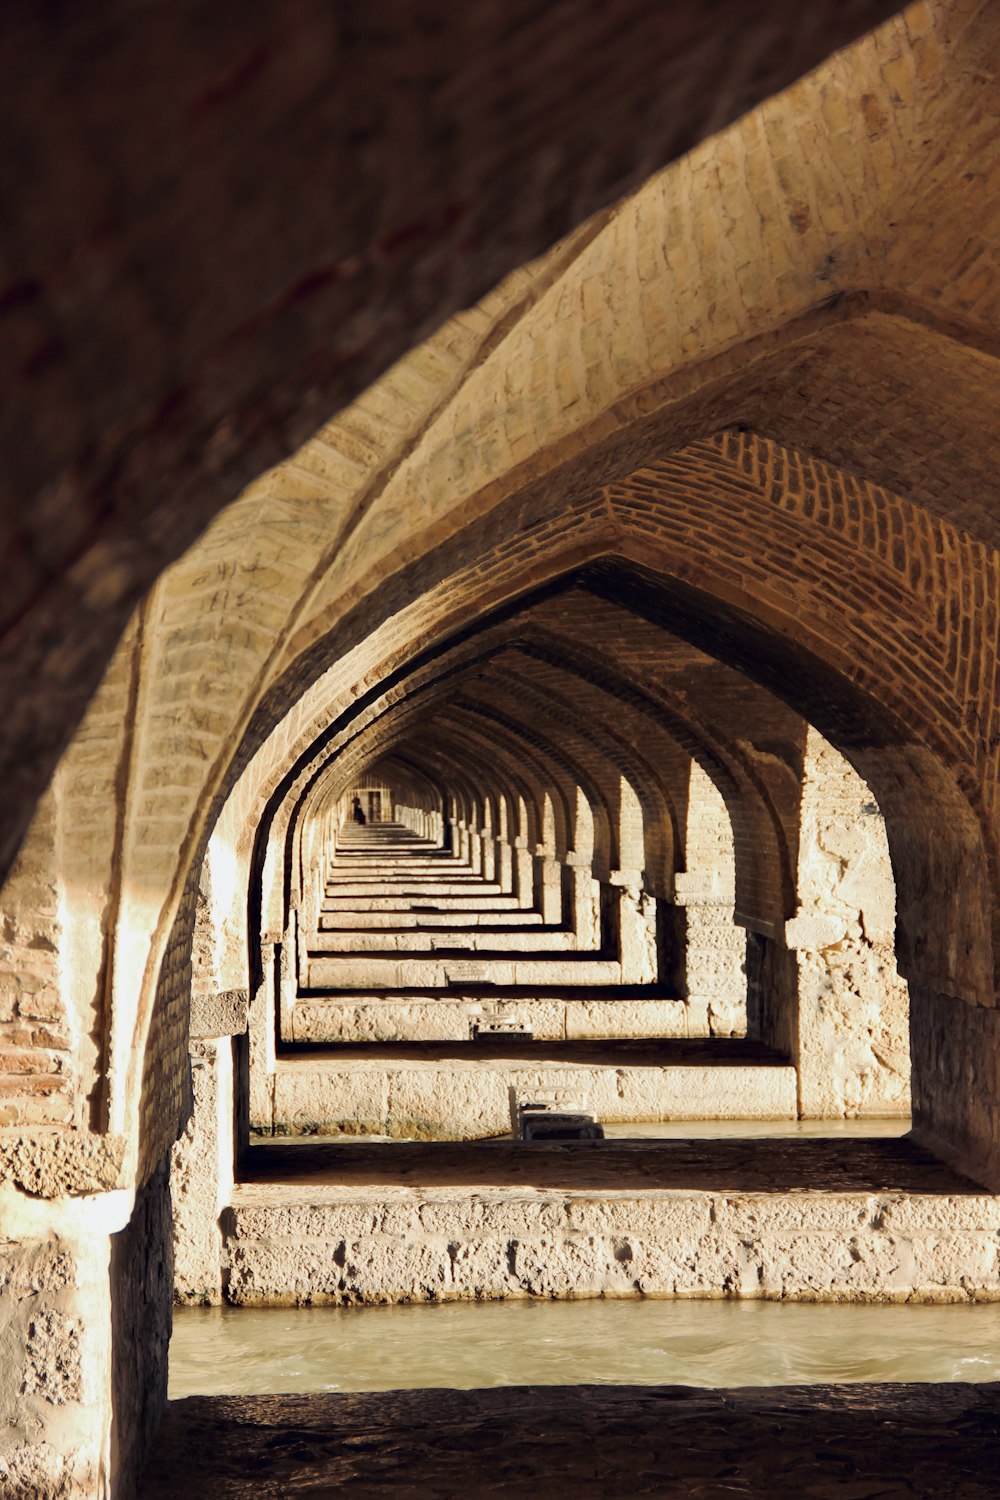 a row of benches in a stone tunnel